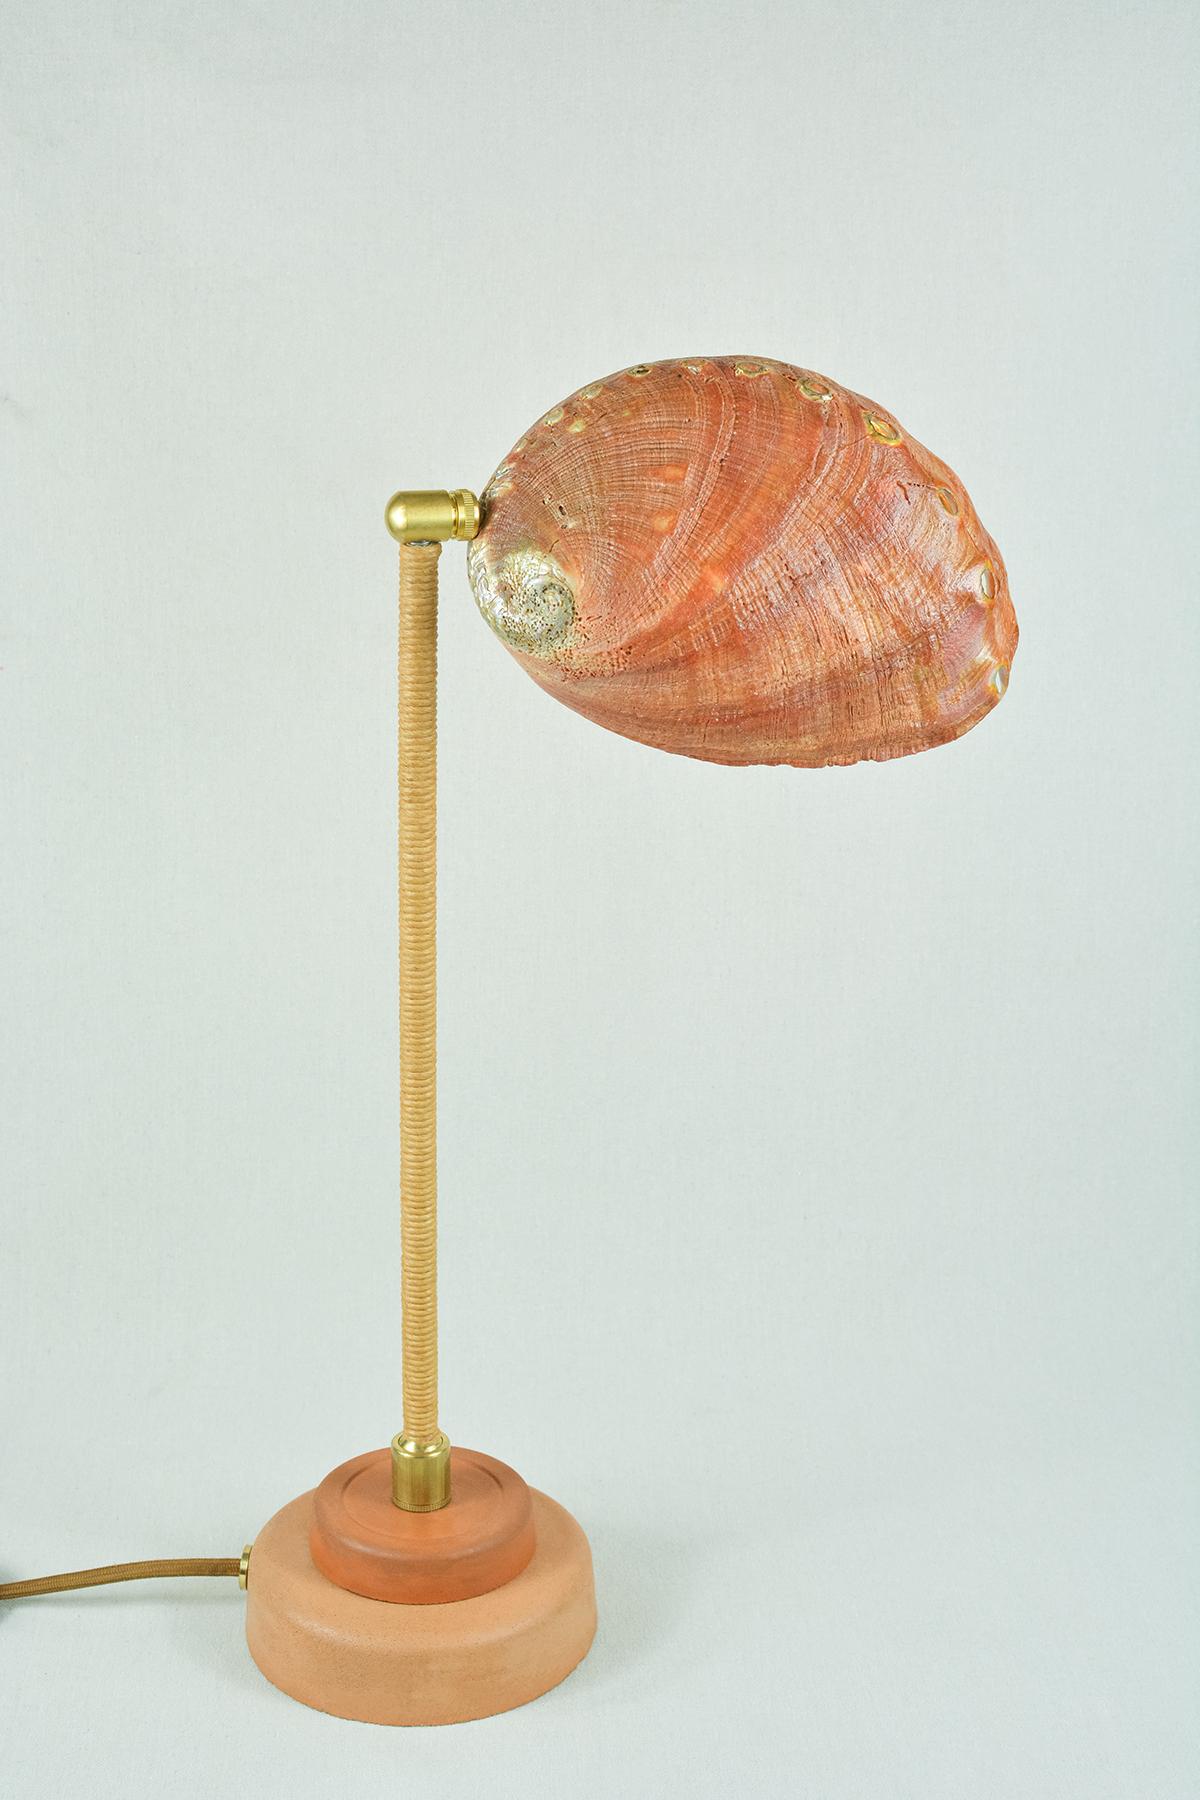 American Modernist 'Abalone Lawyer's Lamp' with Real Vintage Abalone Seashell Shade For Sale